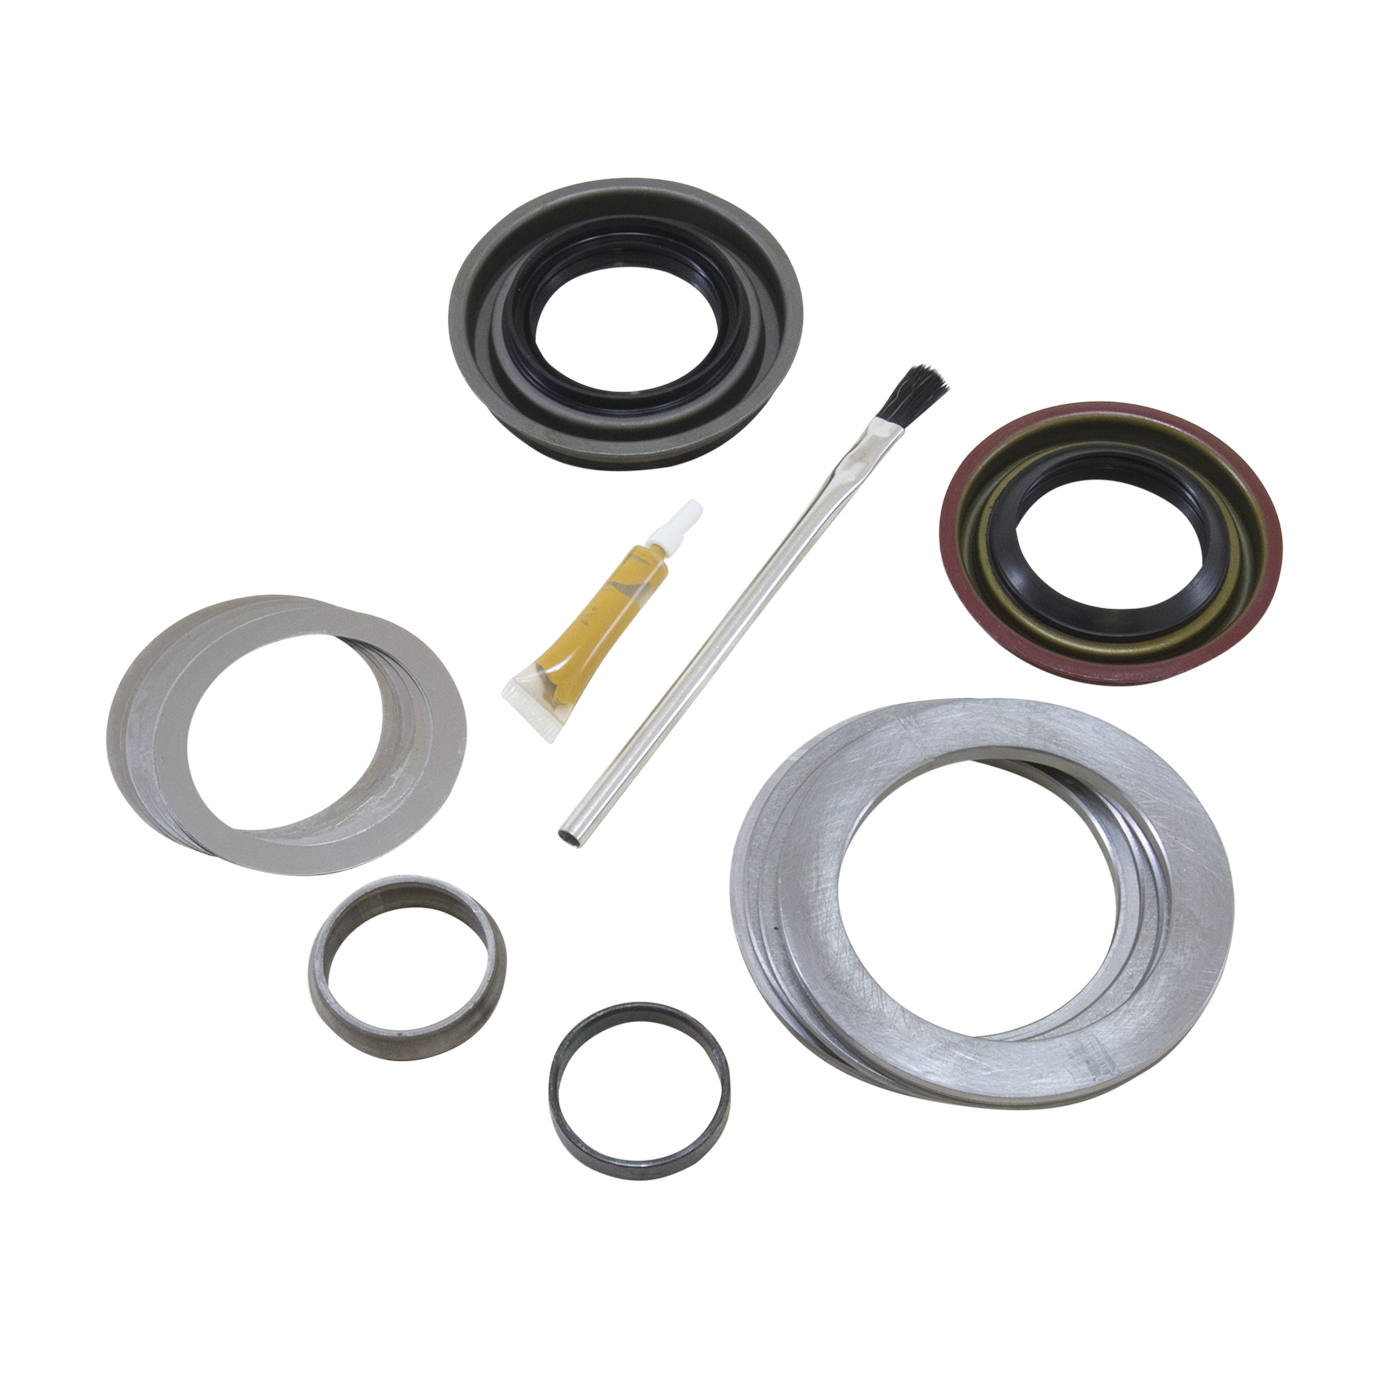 Yukon Minor install kit for Ford 9.75" differential 